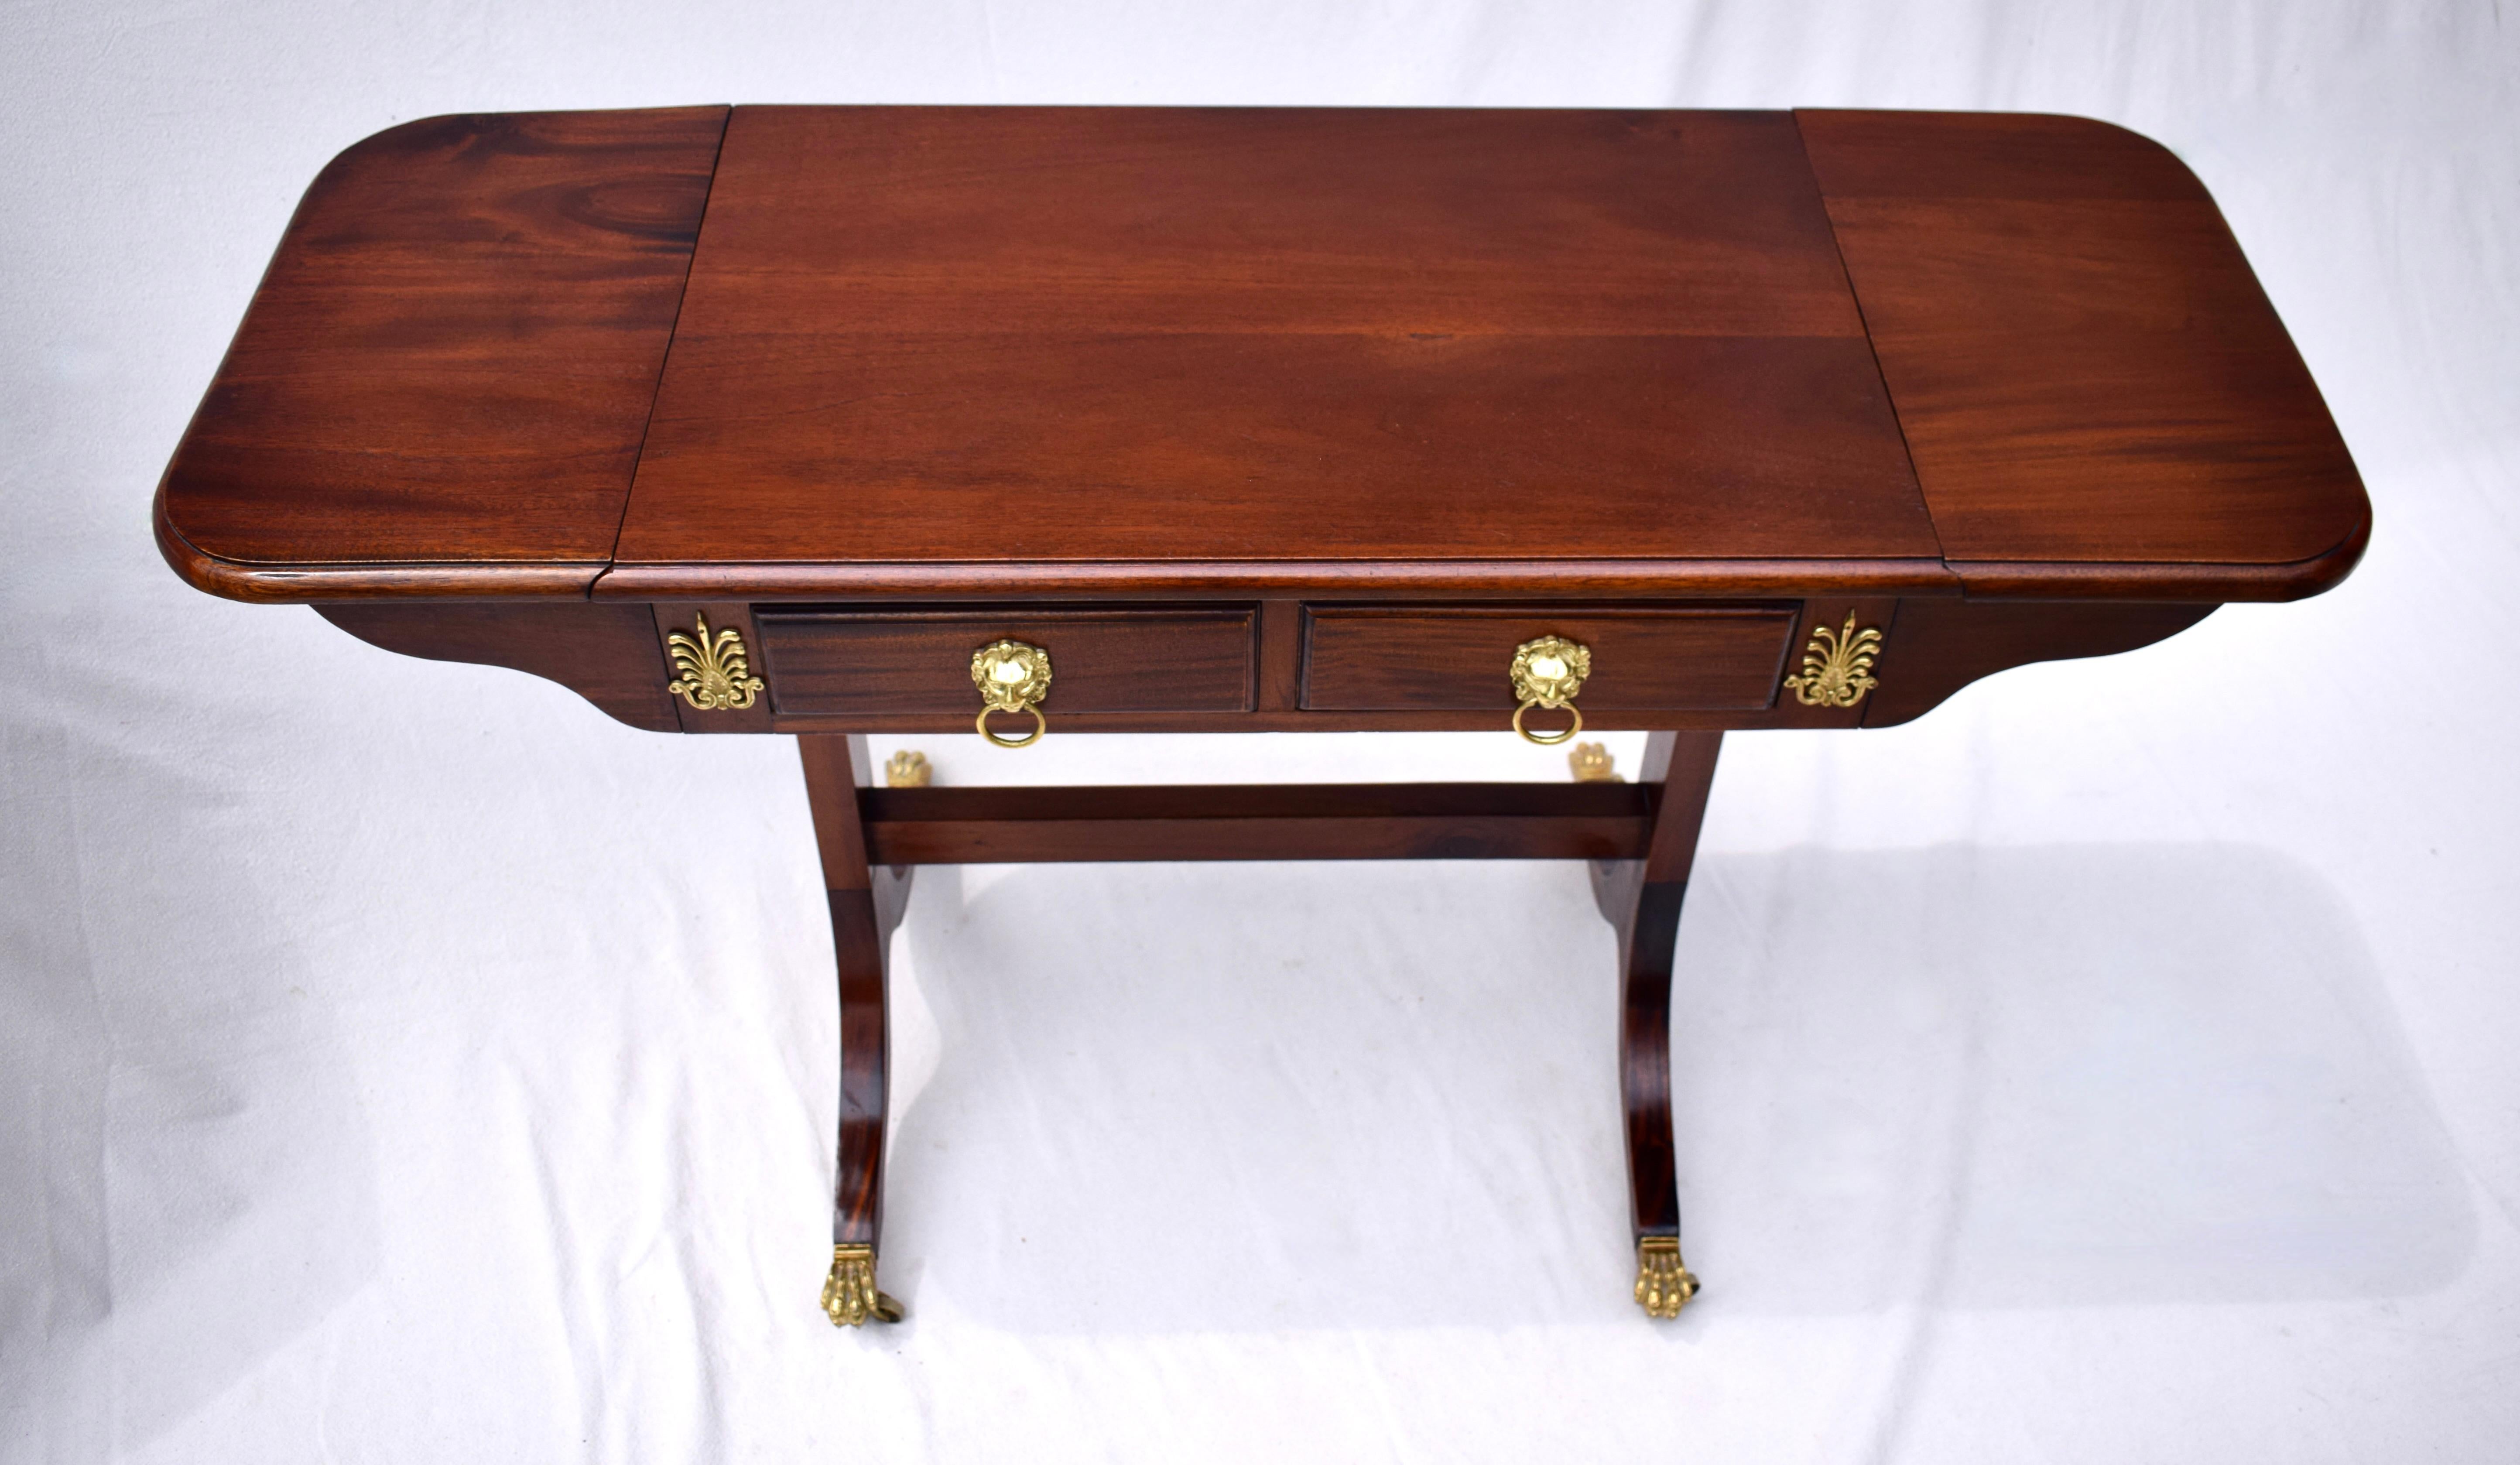 English Georgian style Mahogany drop-leaf console, desk or work table with two fitted dovetail drawers, embellished with brass ornamentation & lions head pulls. The supporting & connecting stretcher terminates on splayed legs with lion paw brass